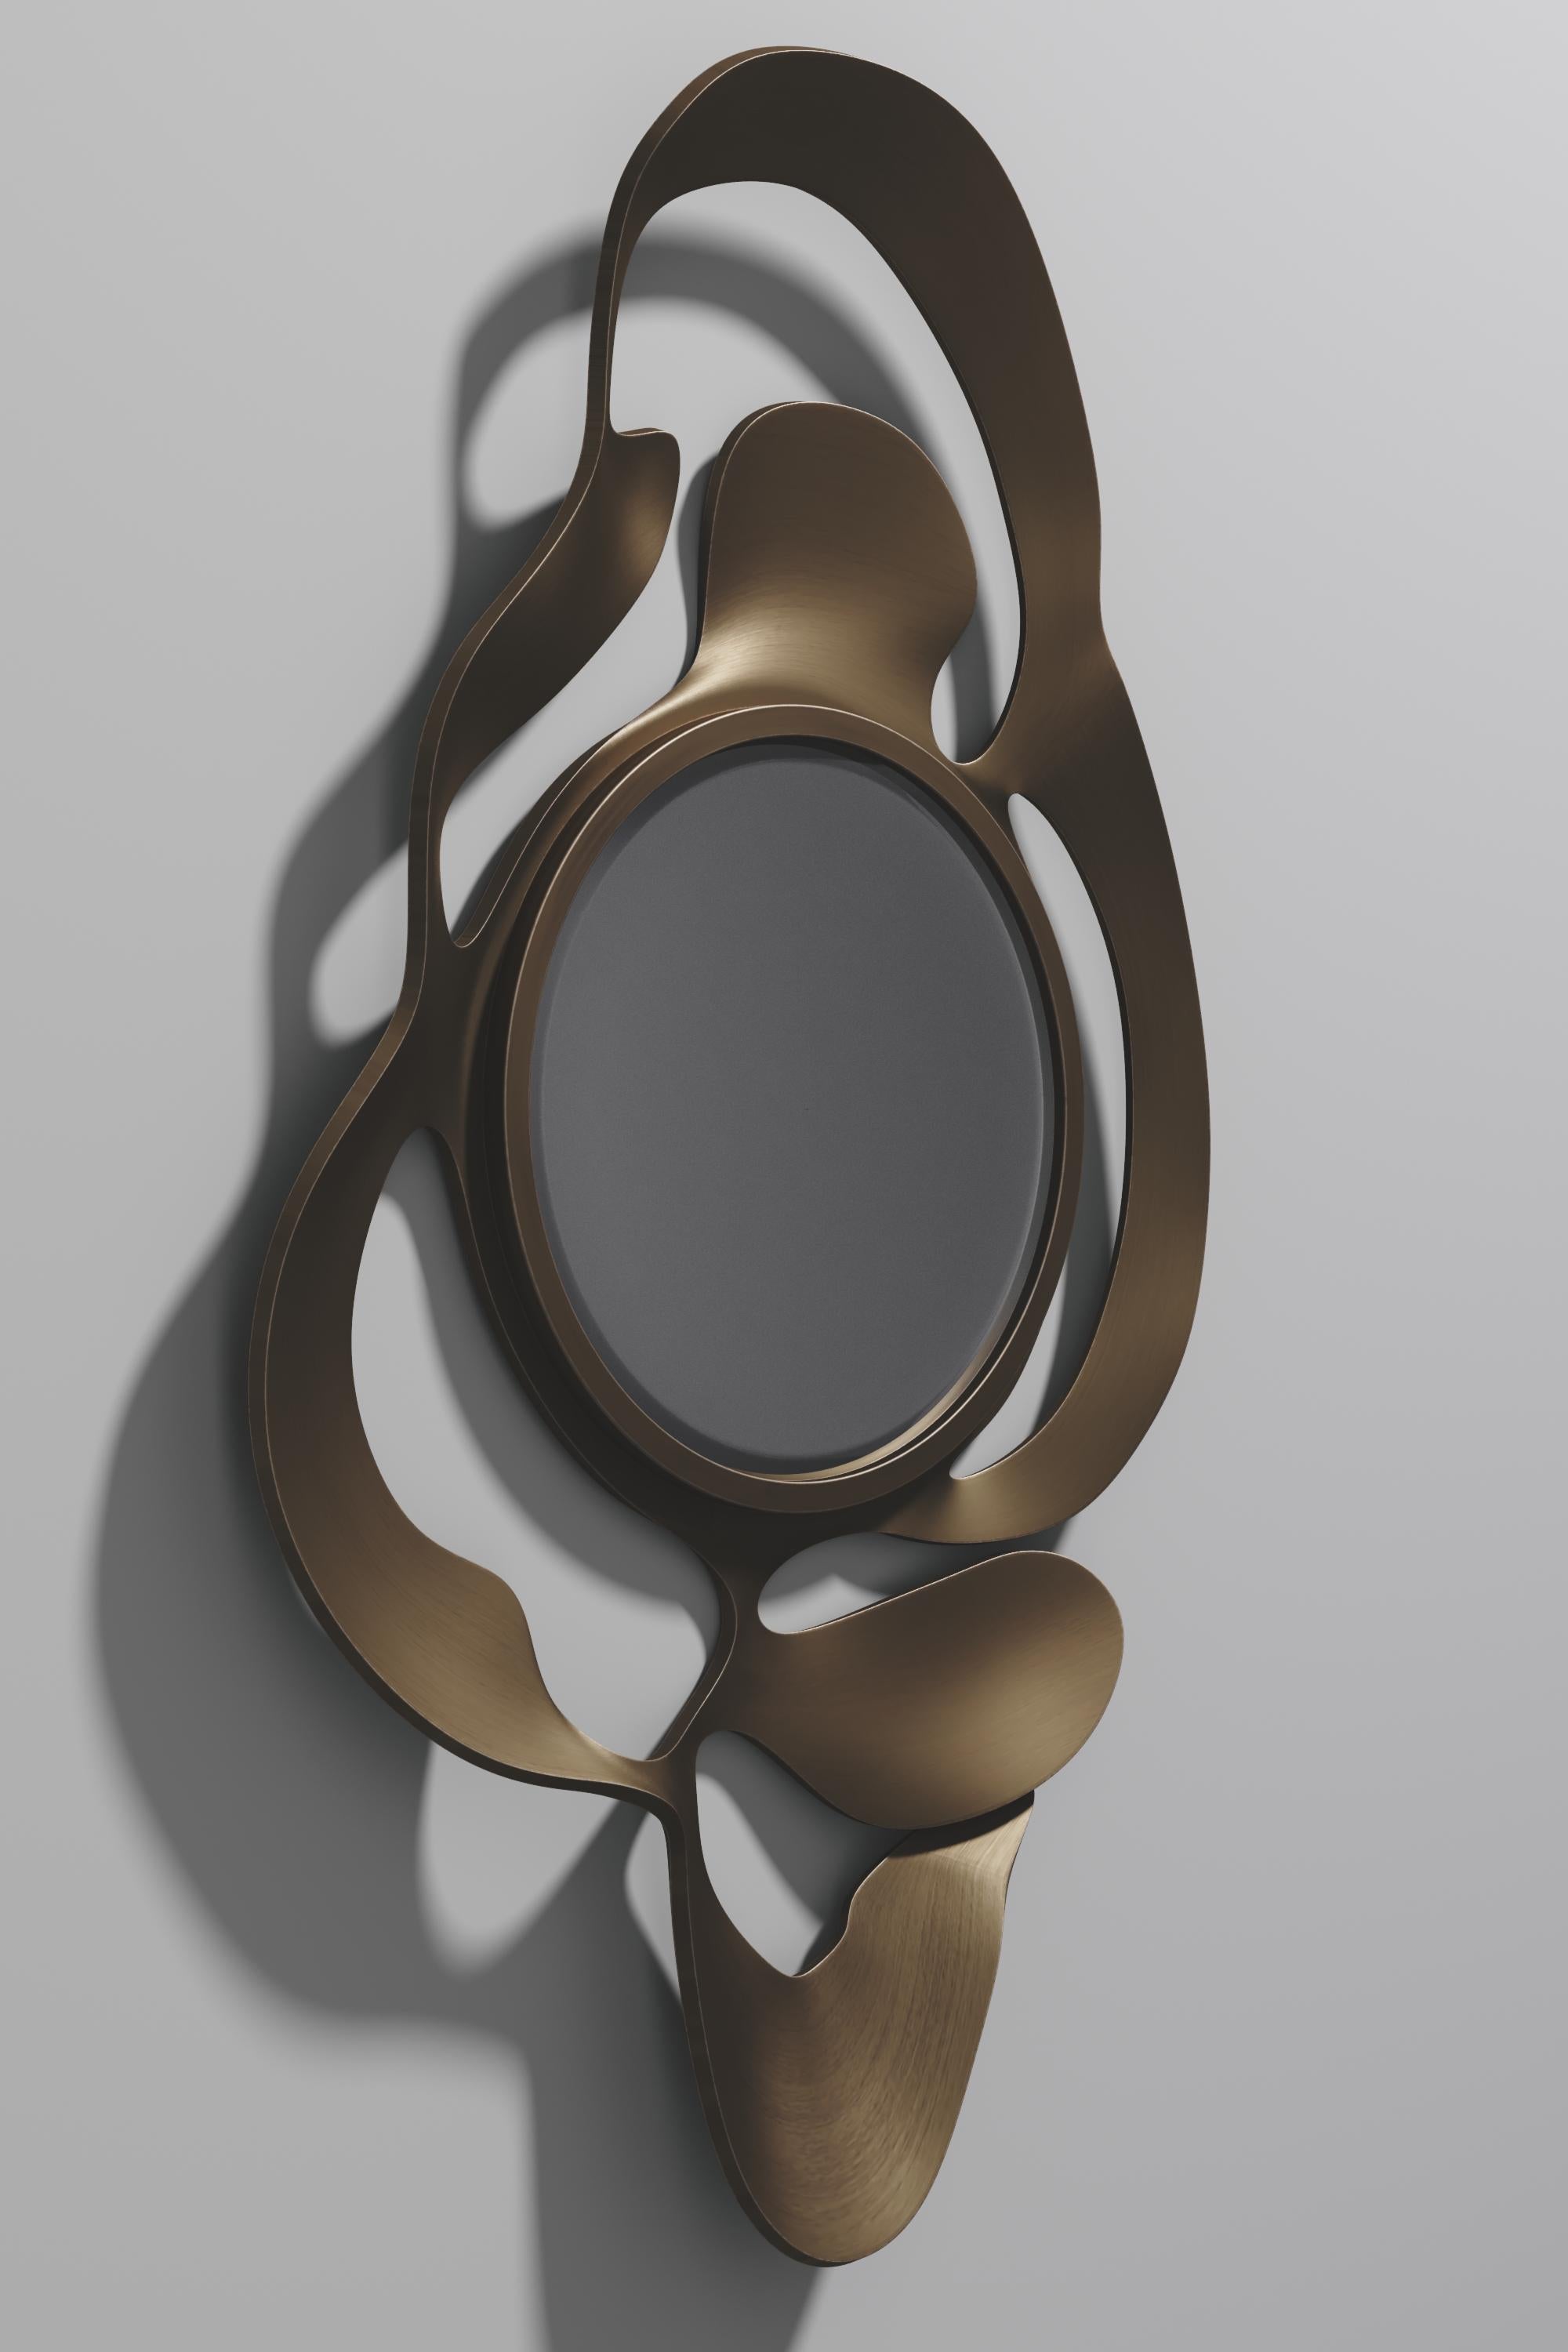 The Leaf Mirror by Kifu Paris is a dramatic and organic piece. The black pen shell and bronze-patina bass inlay mixture creates a striking appearance as it emulates a whimsical interpretation of intertwining branches. This piece is designed by Kifu